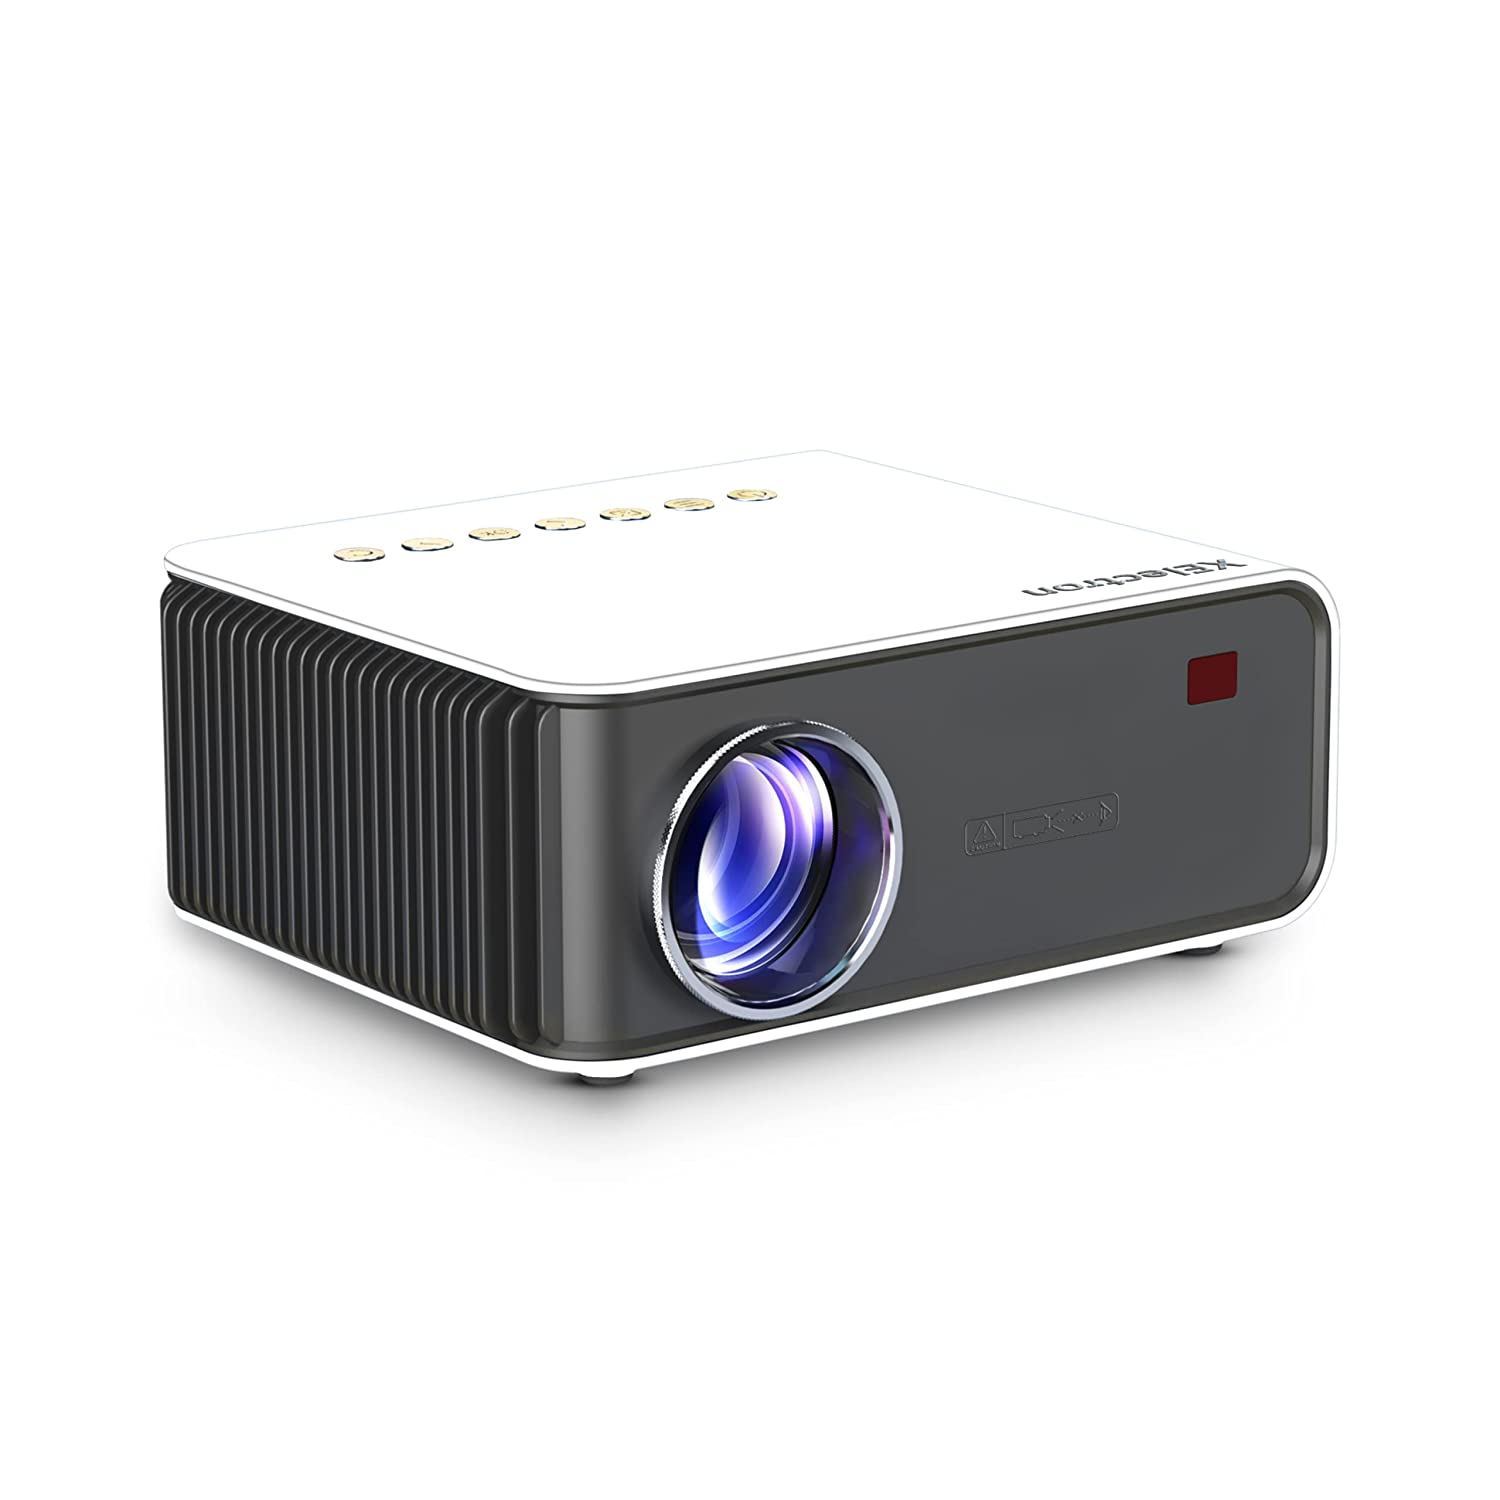 S1 2600 Lumen LED Projector (1080p Support) | 150 inch Display (White)